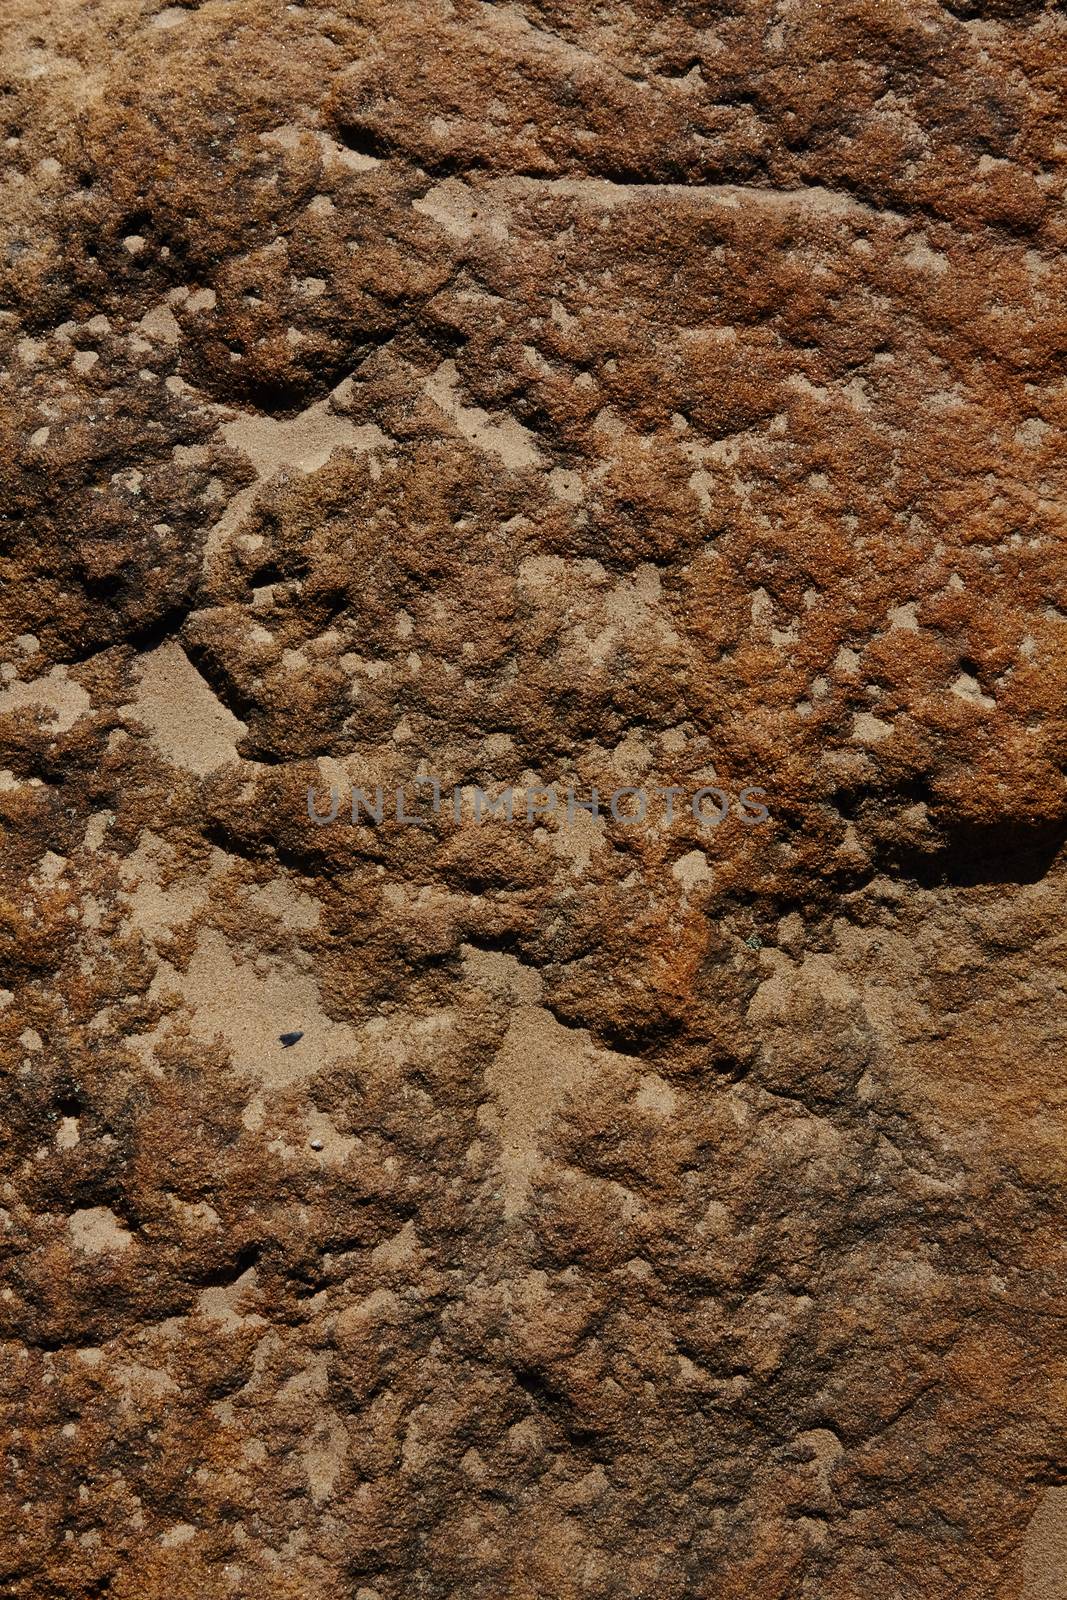 surface of the stone with brown tint